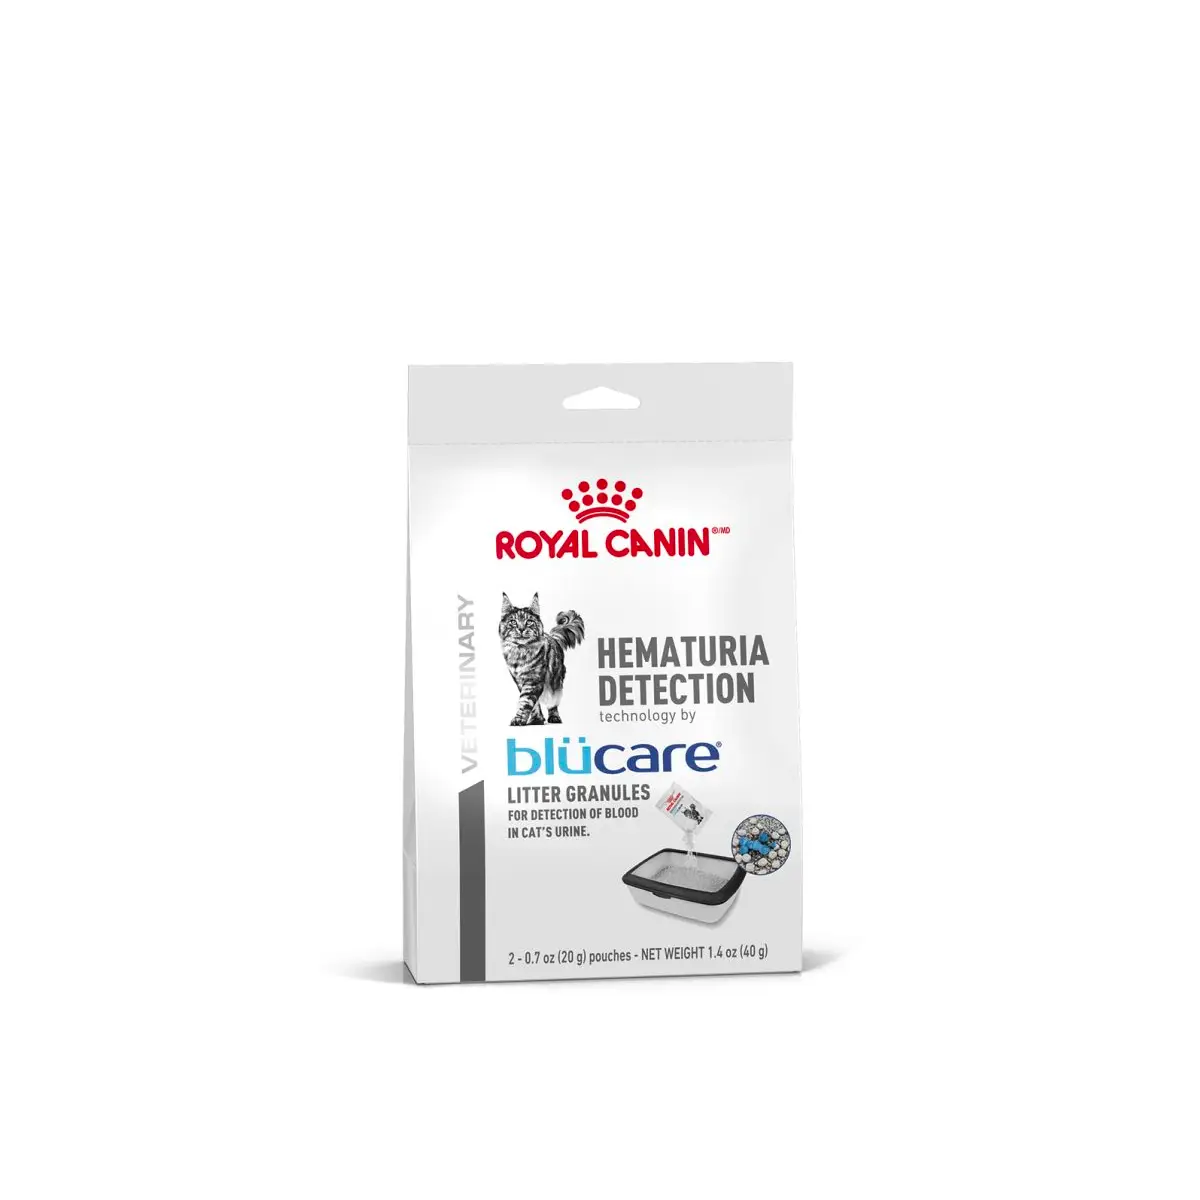 Royal Canin - Hematuria Detection By Blucare 20g X 2